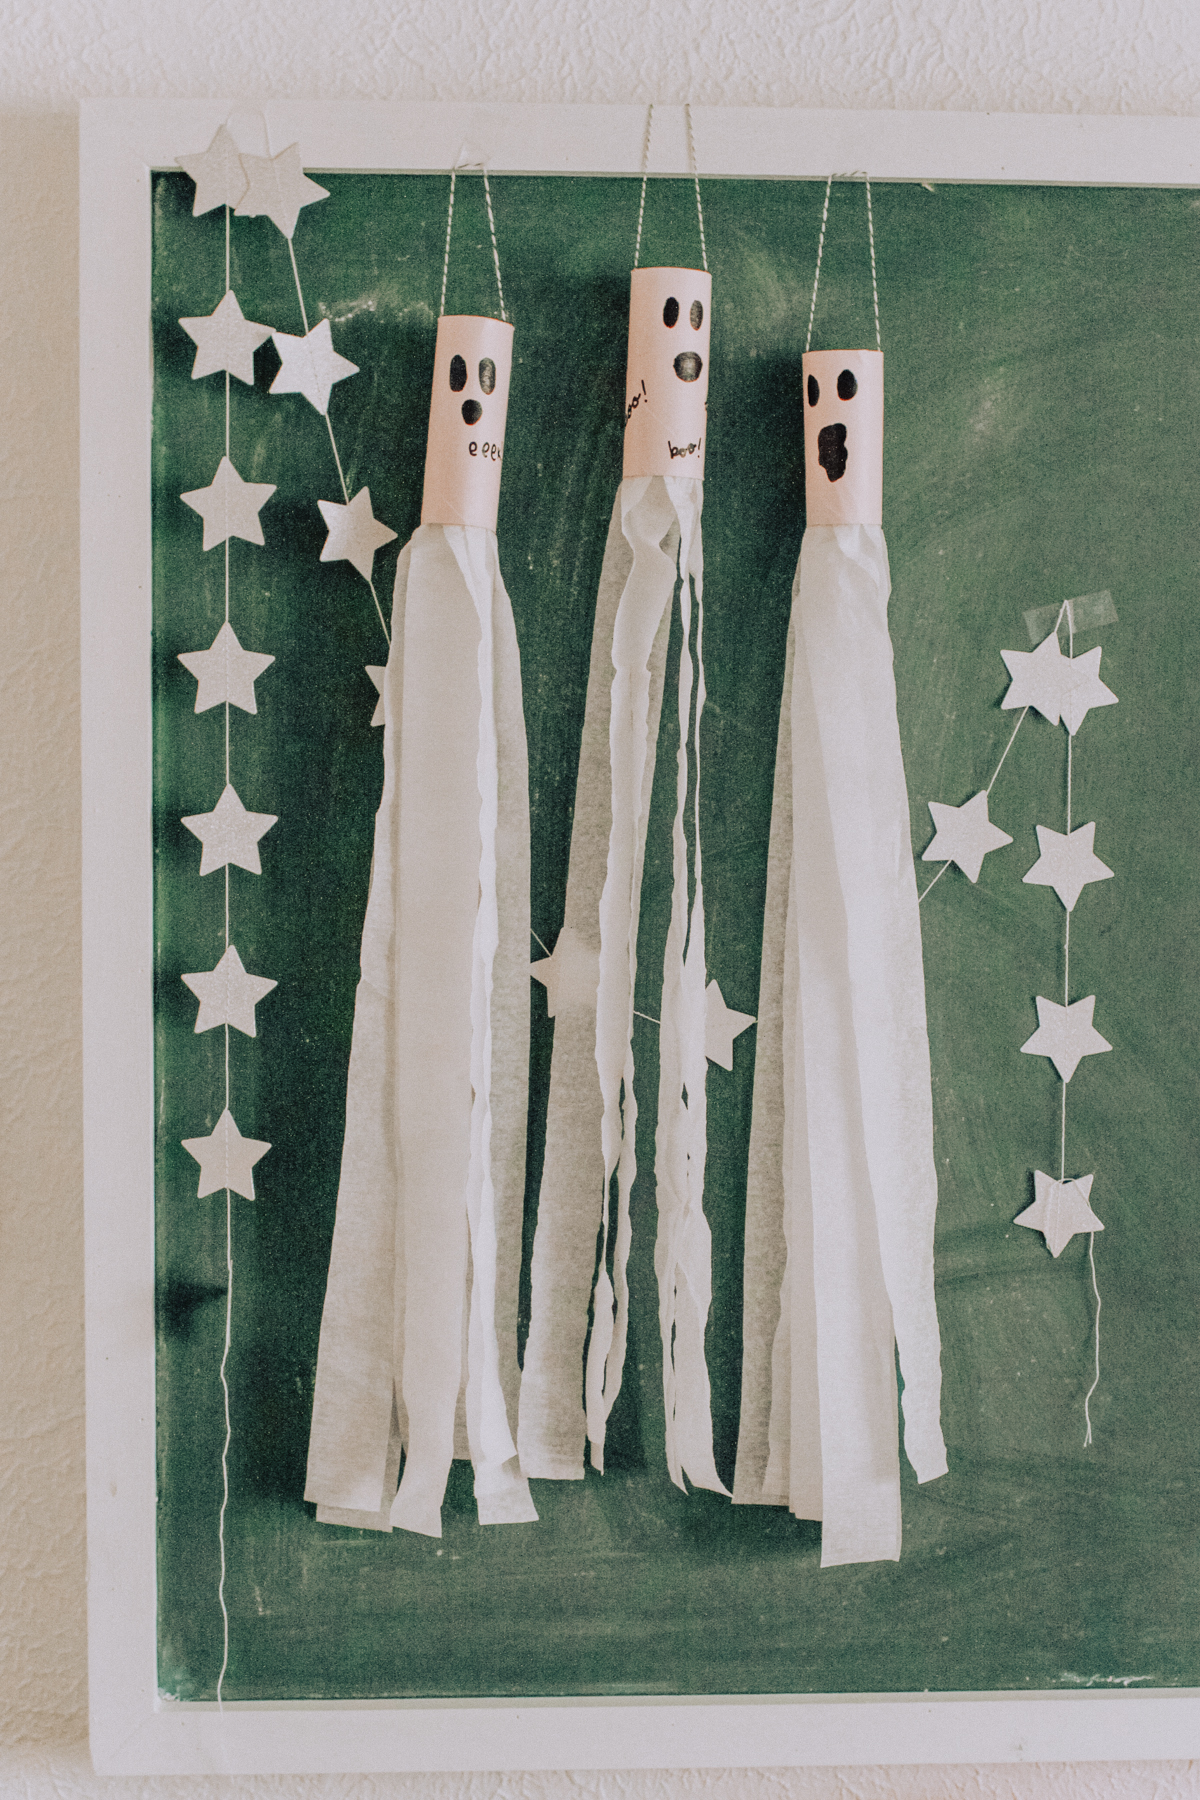 MINI MAKERS: TOILET PAPER ROLL GHOSTS (WITH AN EASY HACK IF YOU DON'T HAVE  T.P. ROLLS OR WANT TO SKIP THE PAINTING PART) - RAE ANN KELLY